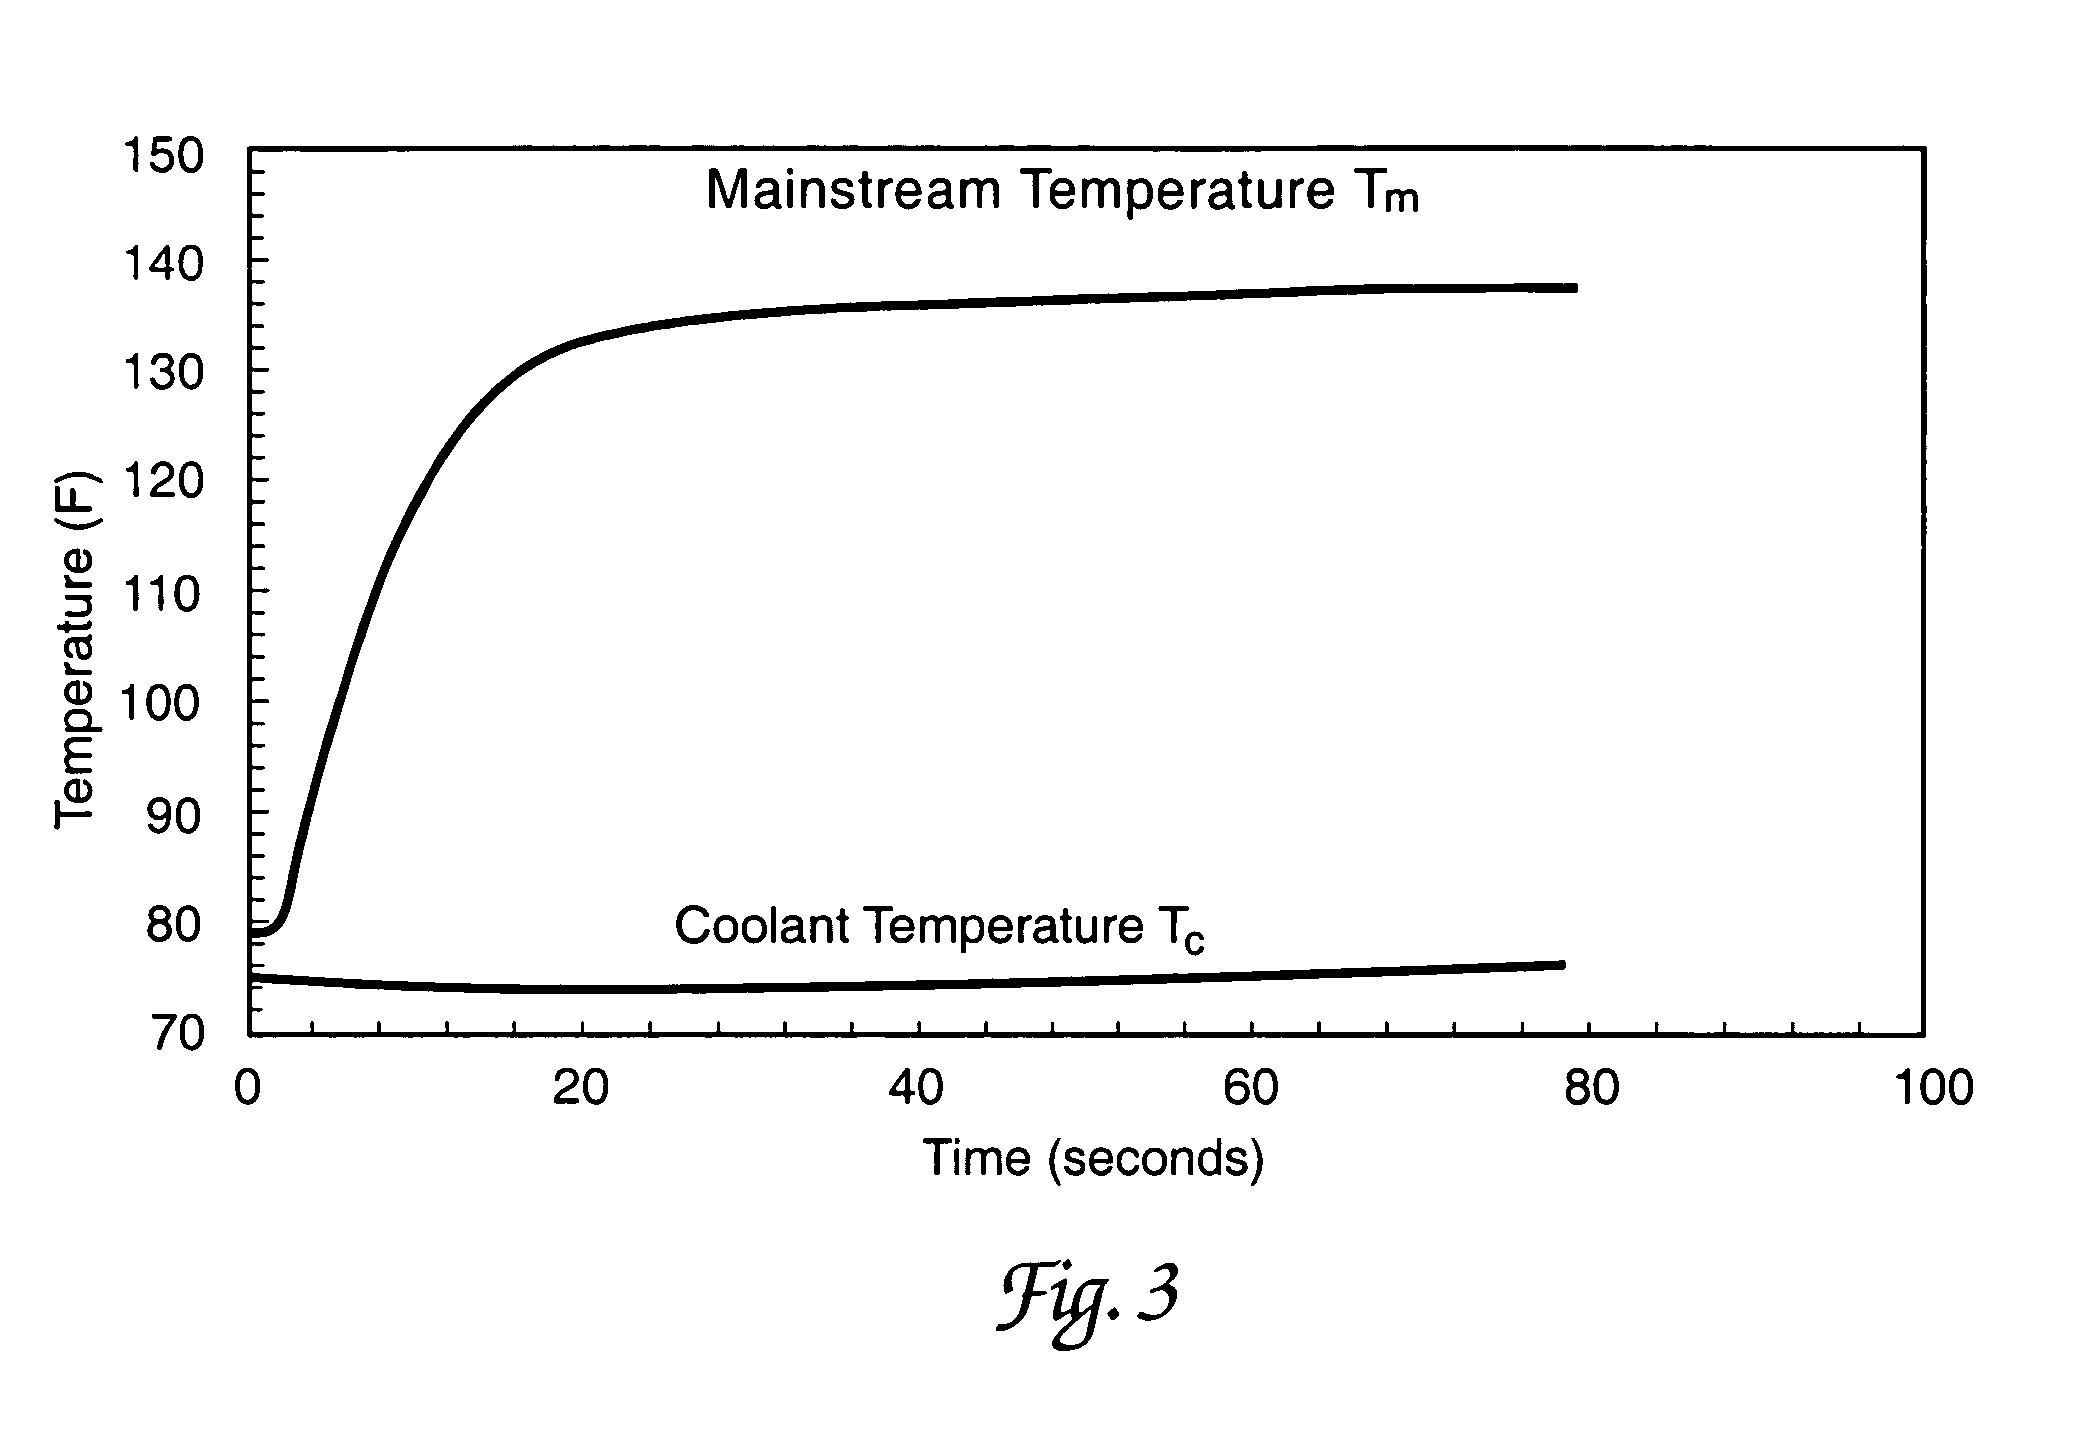 Method of infrared thermography